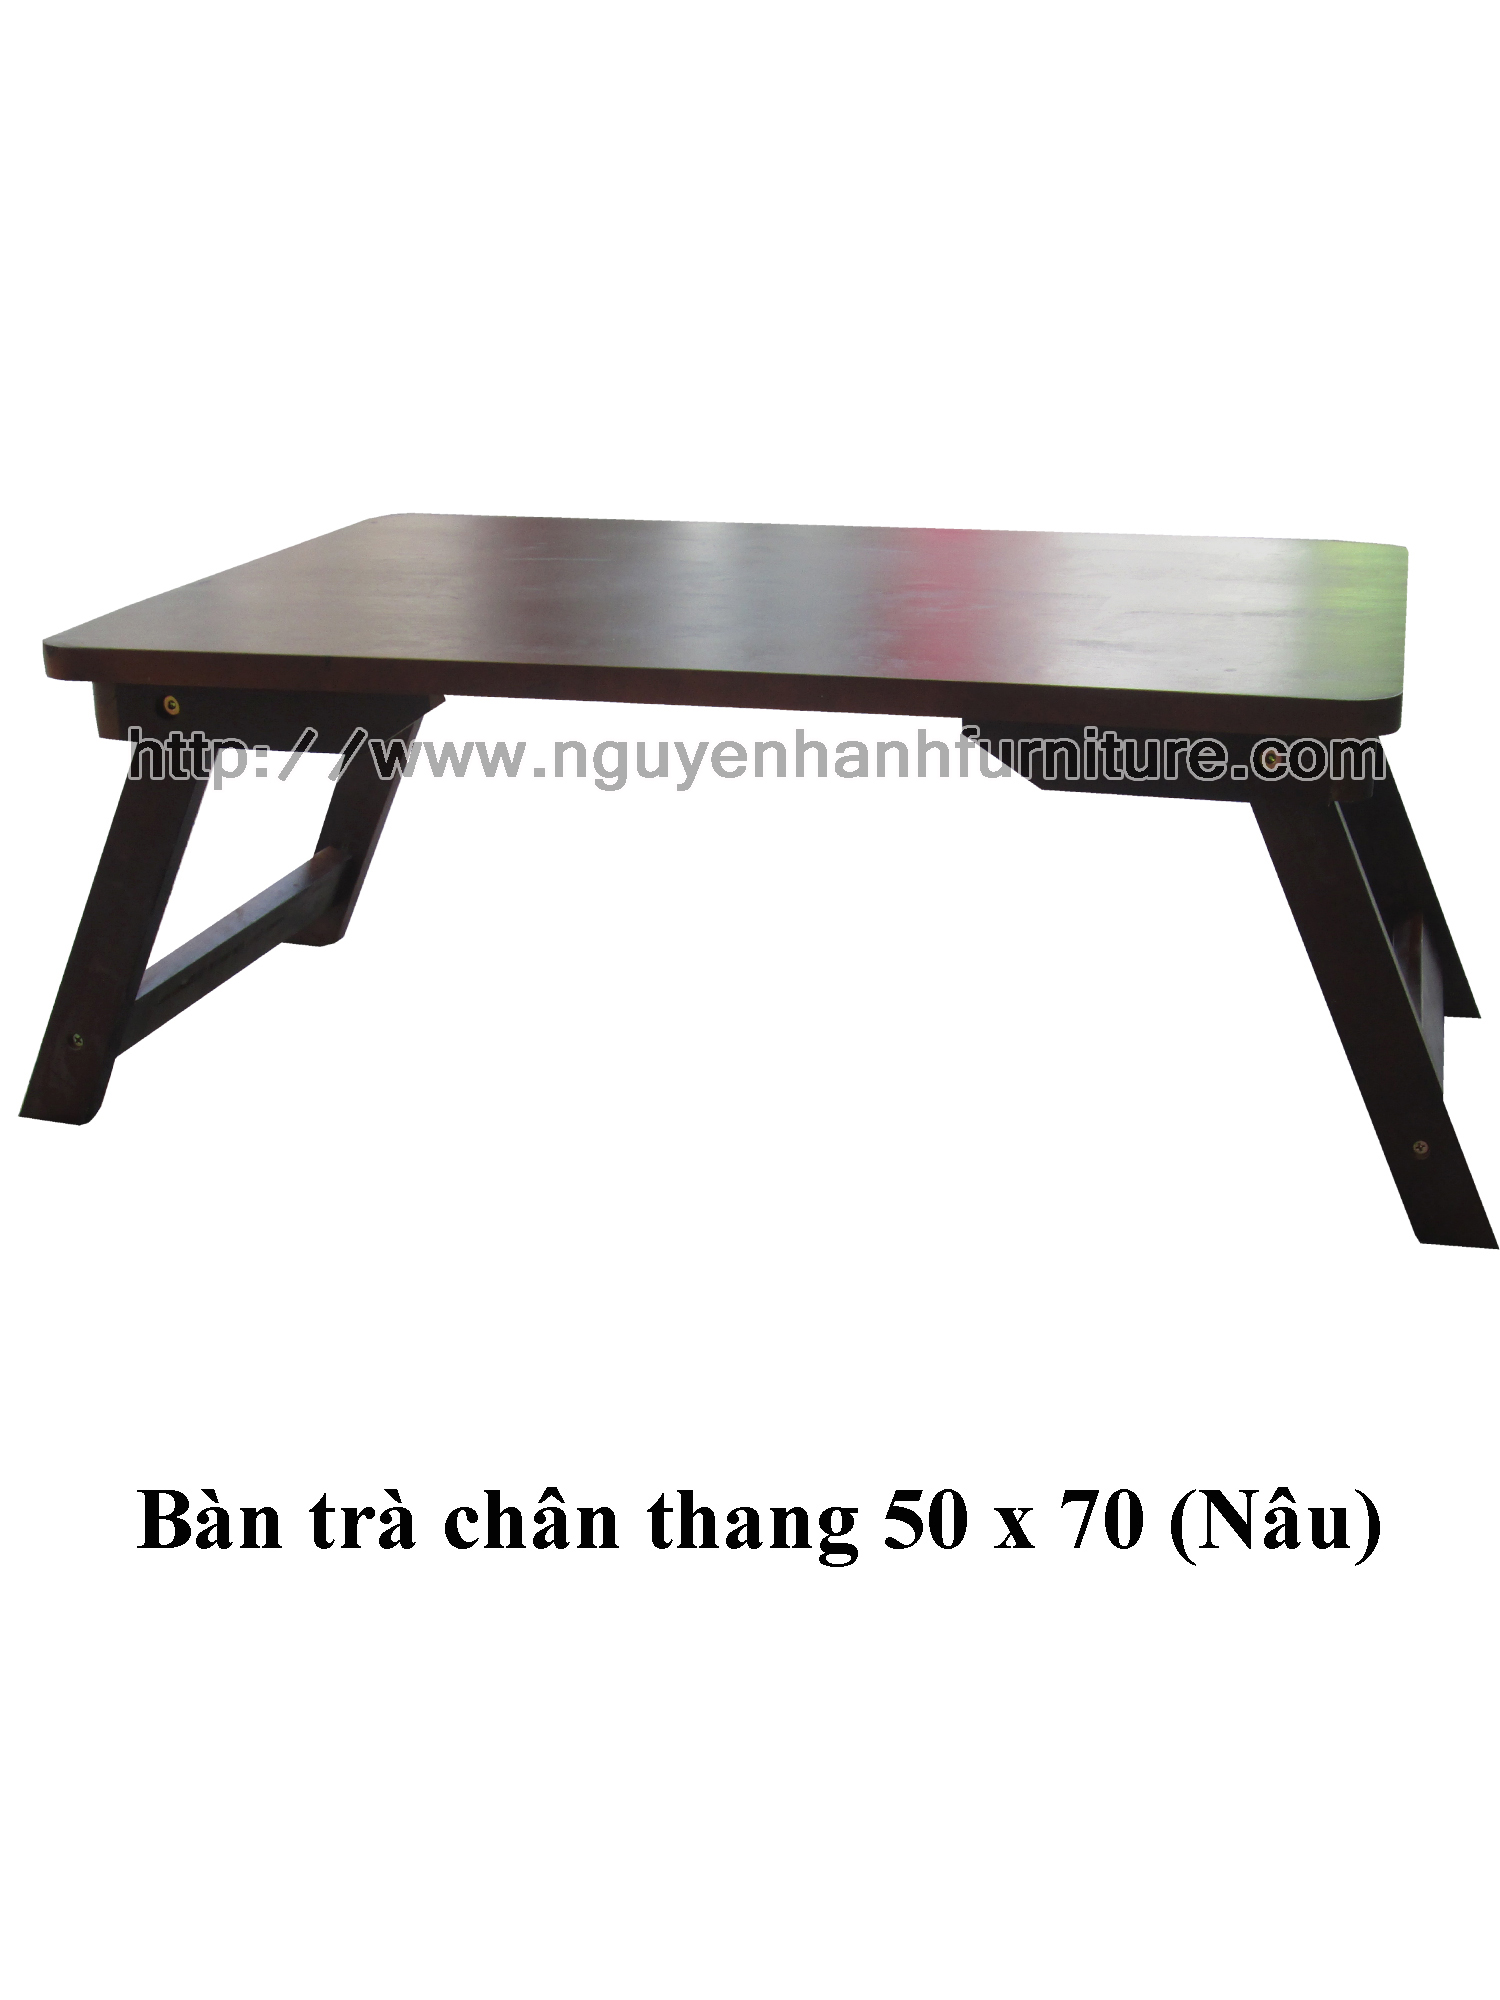 Name product: 5 x 7 Tea table with ladder shape legs (Brown) - Dimensions: 50 x 70 x 24 (H) - Description: Wood natural rubber